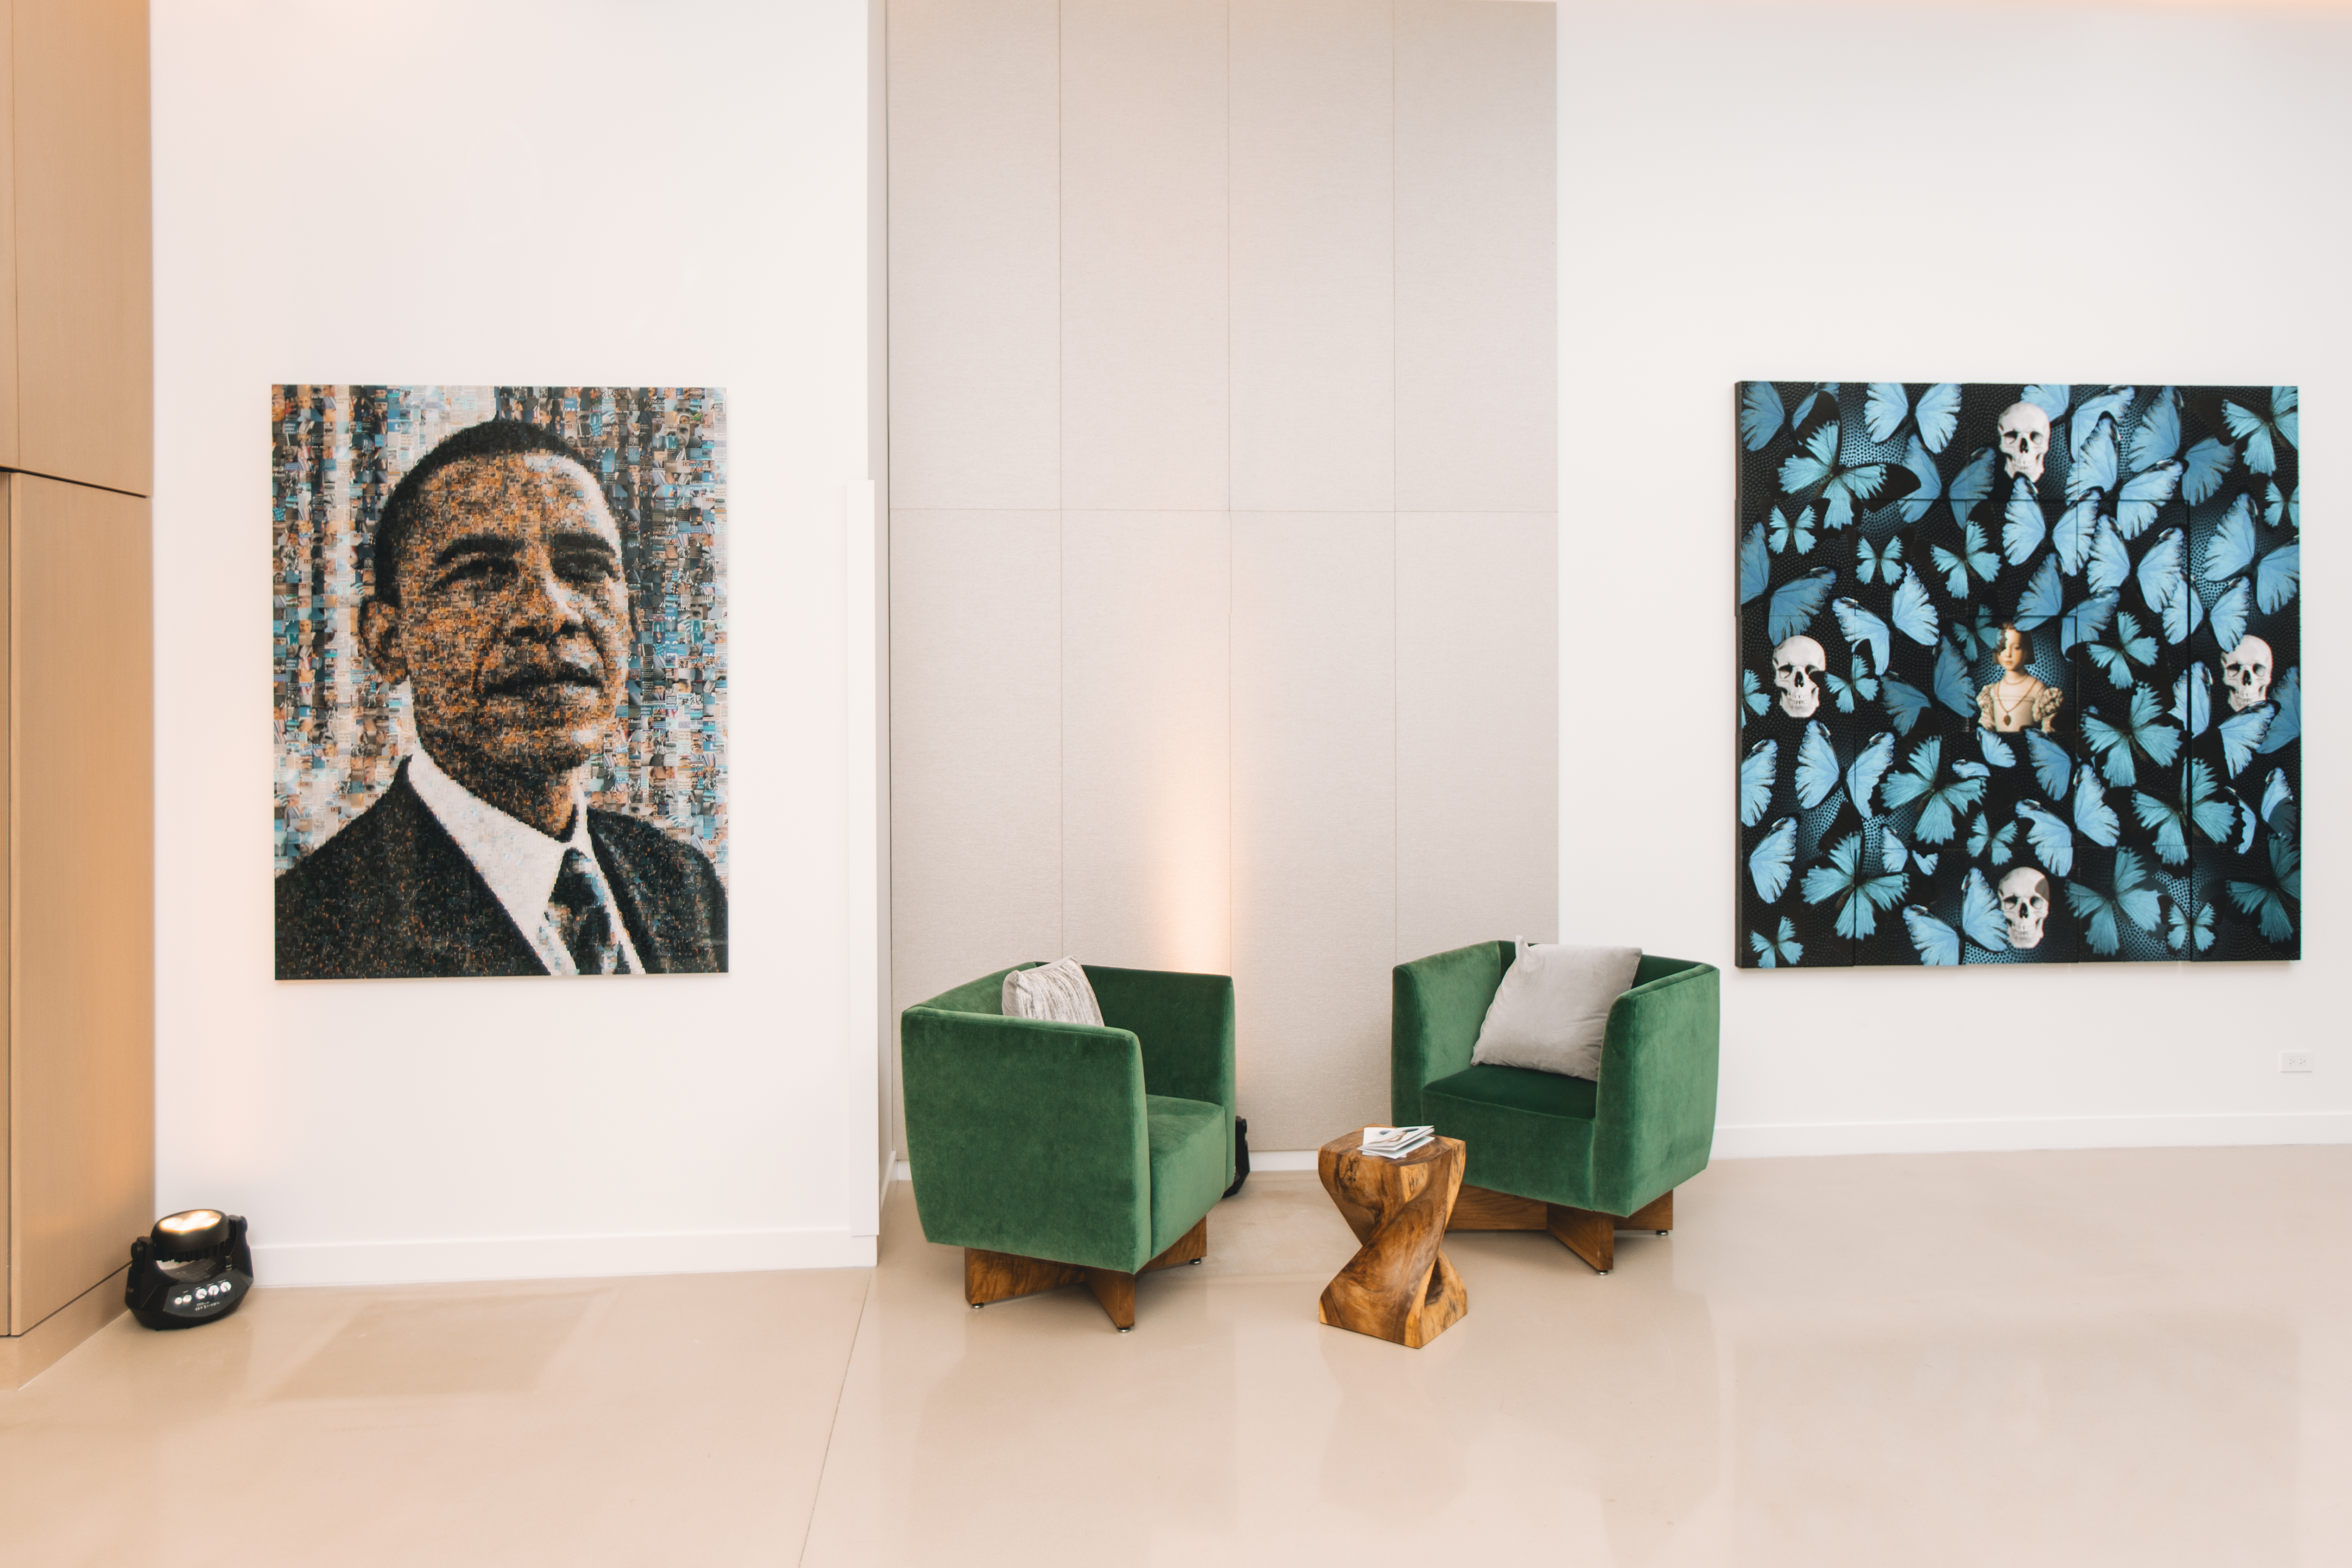 Barack_Obama_by_Robert_Silvers_and_The_Order_of_Life_by_Marco_Veronese_at_at_21c_Museum_Hotel_Chicago_s_Pop_Stars!_Popular_Culture_and_Contemporary_Art_Exhibition_Photo_Credit_Codi_Palm.jpg